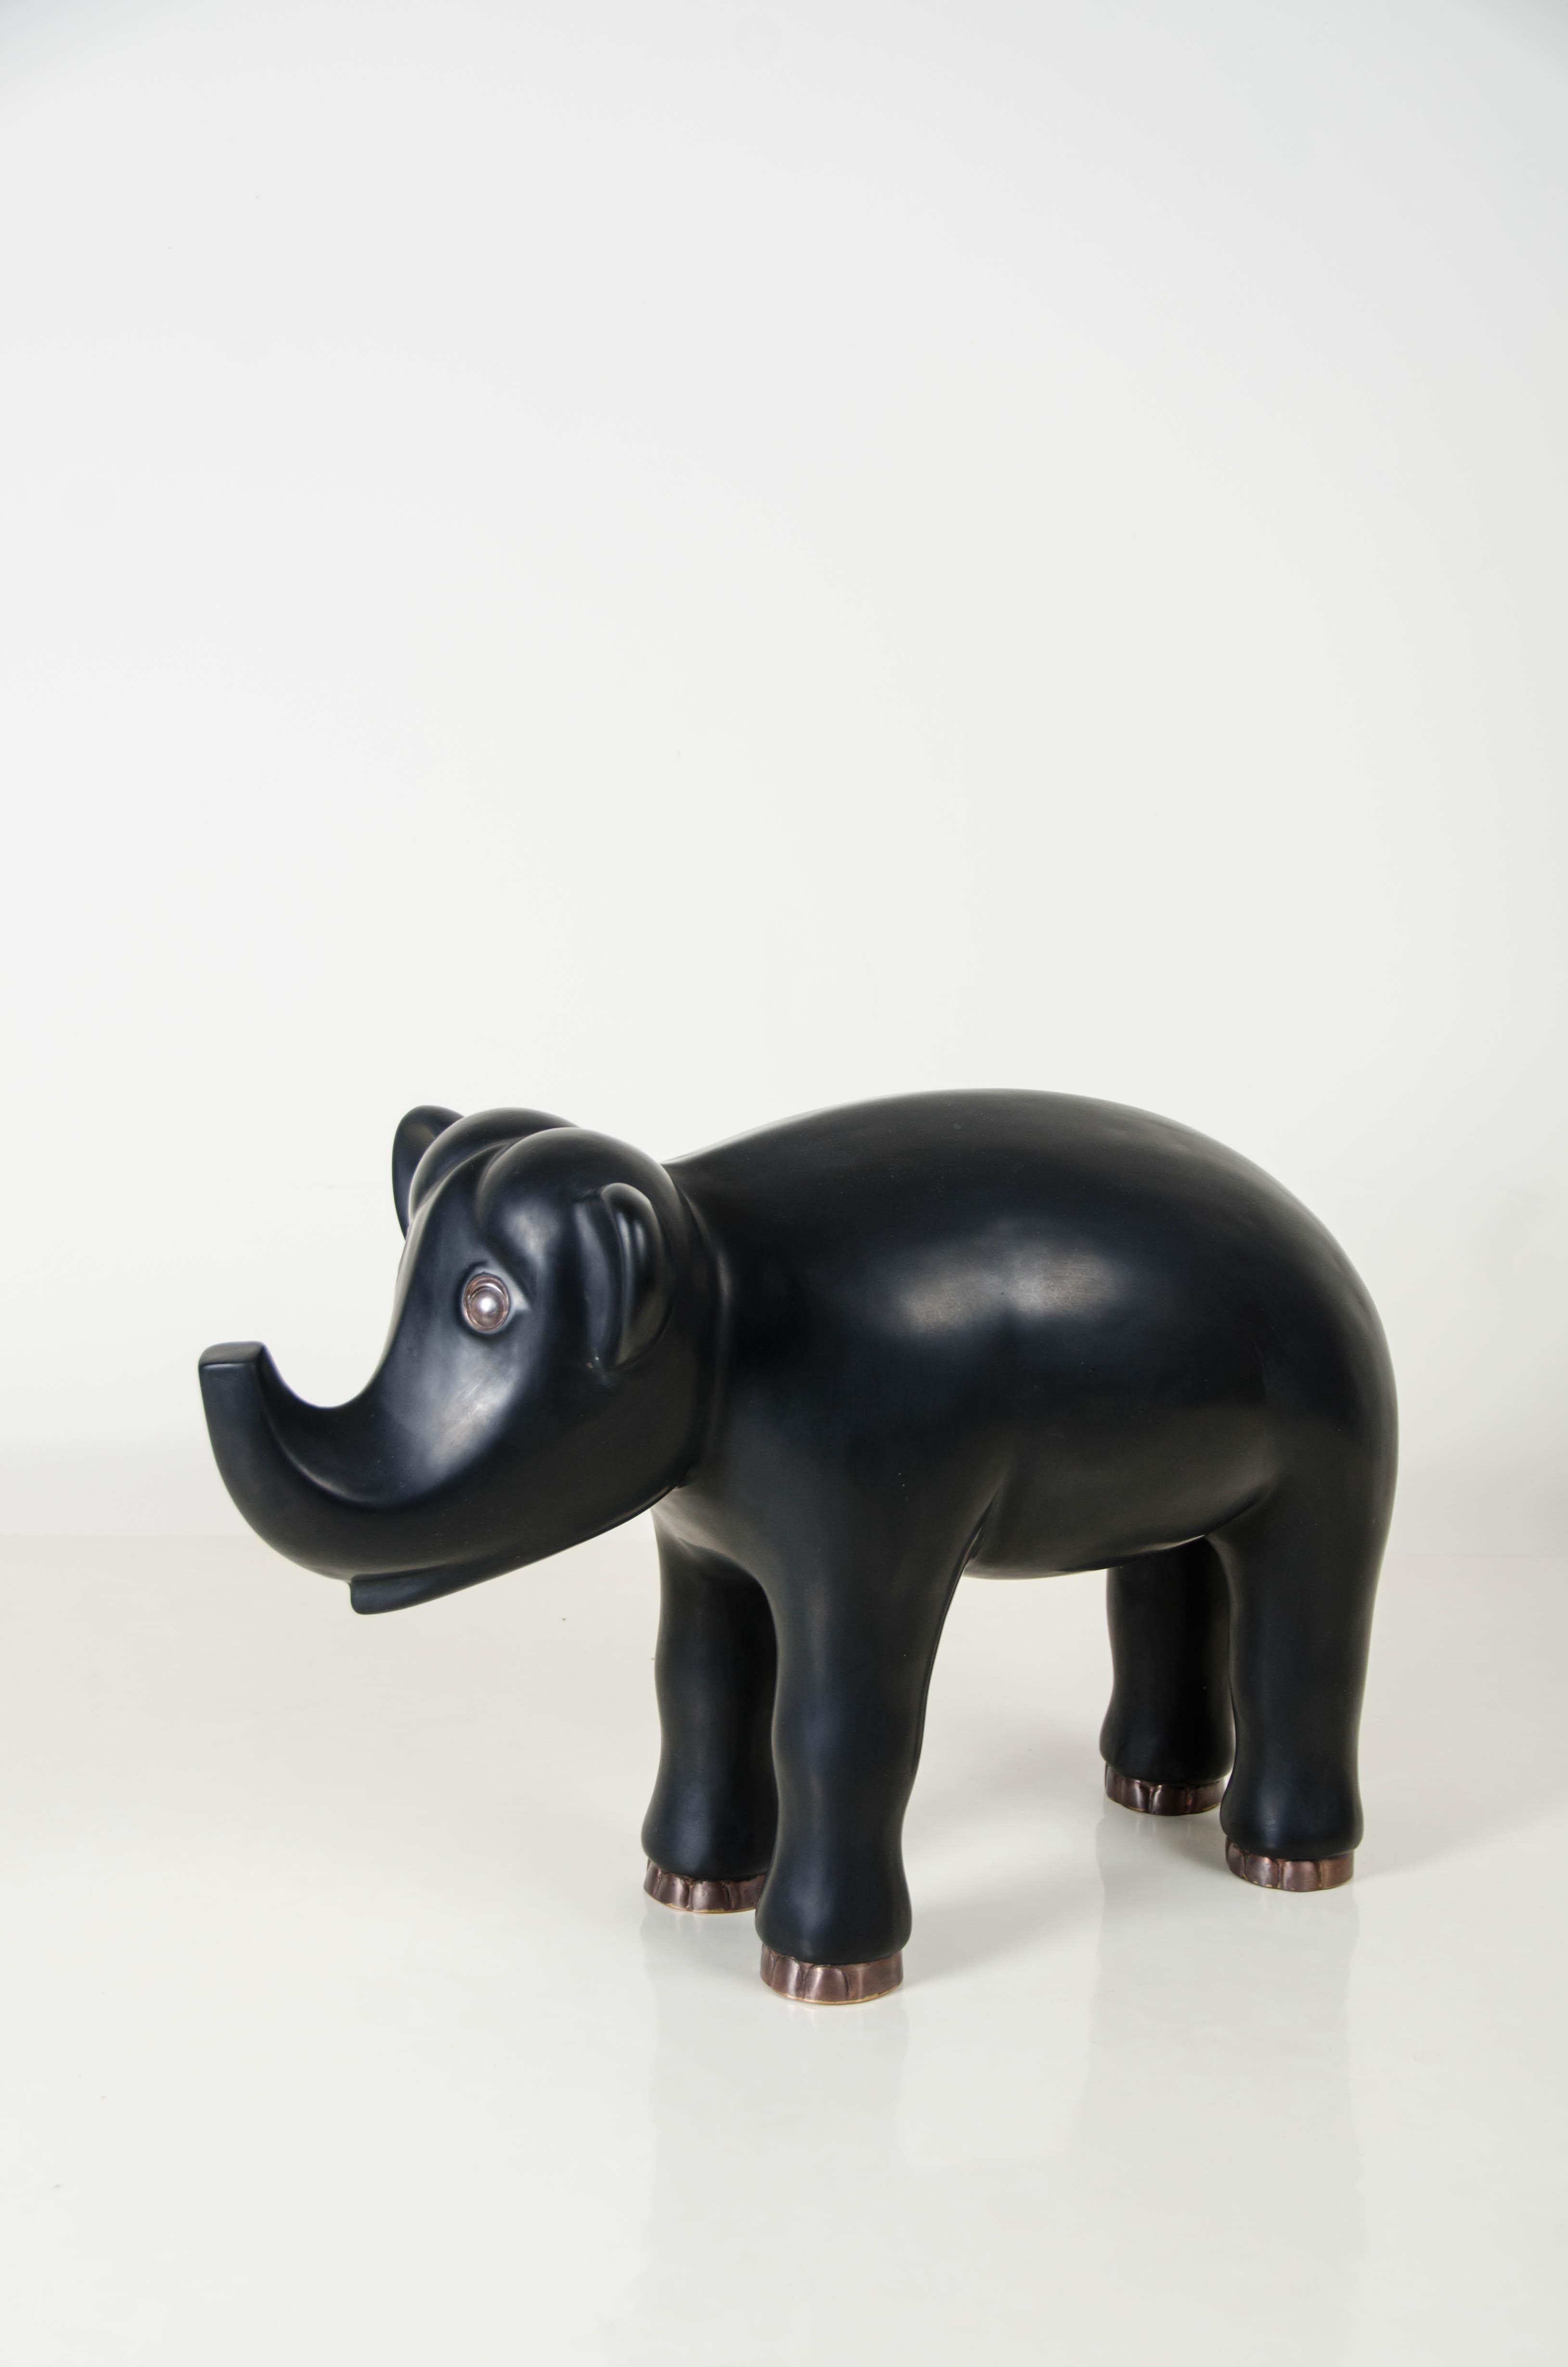 Elephant sculpture
Black Lacquer
Hand repoussé
Copperbase
Limited edition

Repousse is the traditional art of hand-hammering decorative relief onto sheet metal. The technique originated around 800 BC between Asia and Europe and in Chinese historical